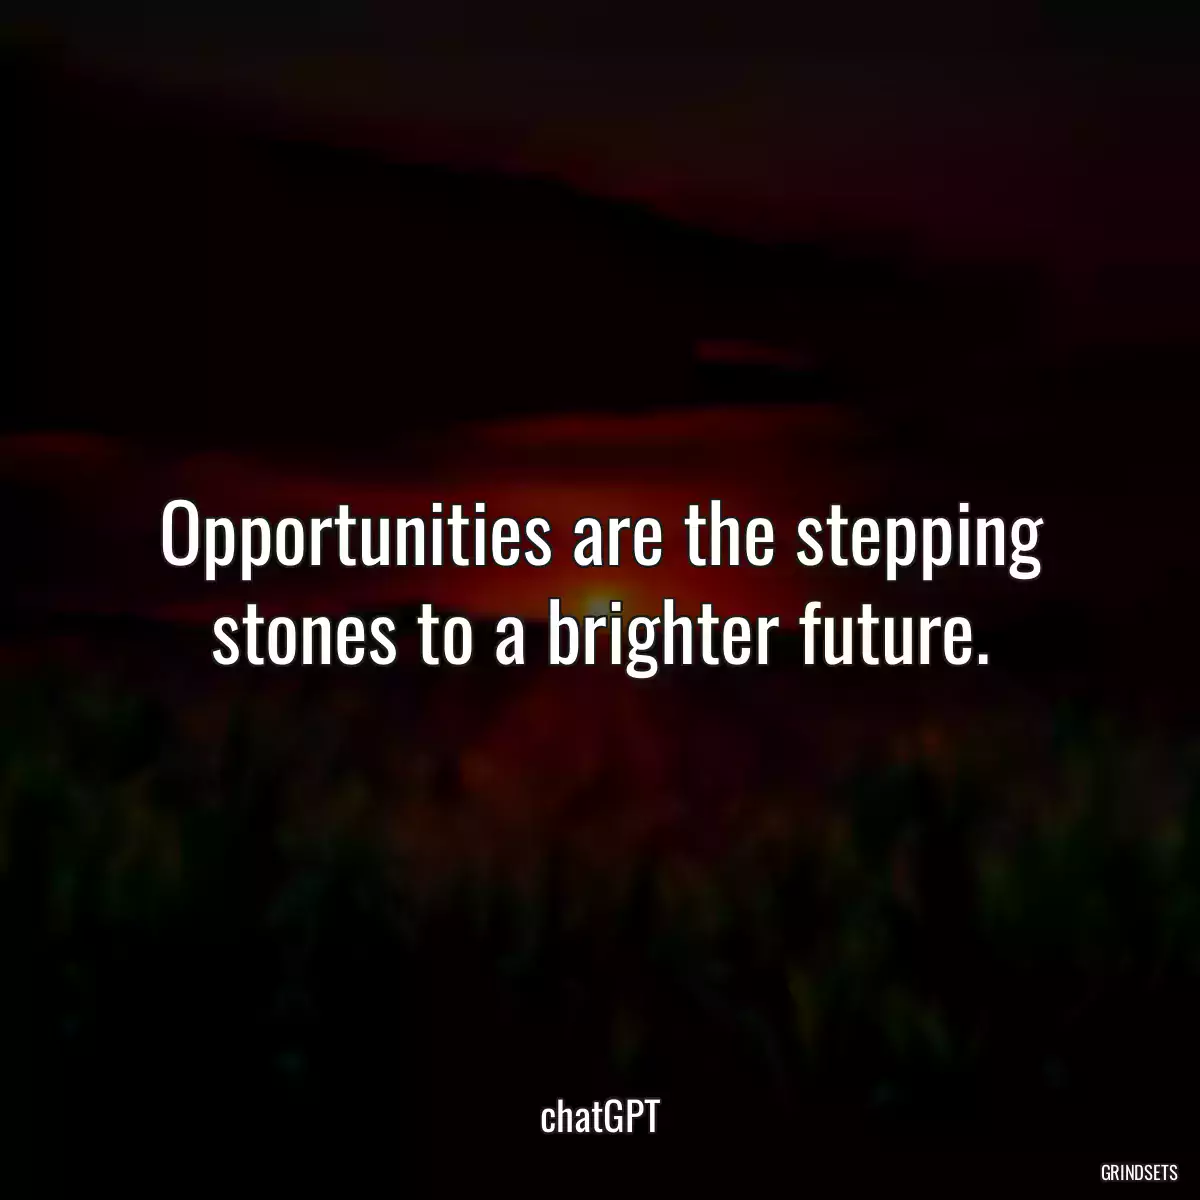 Opportunities are the stepping stones to a brighter future.